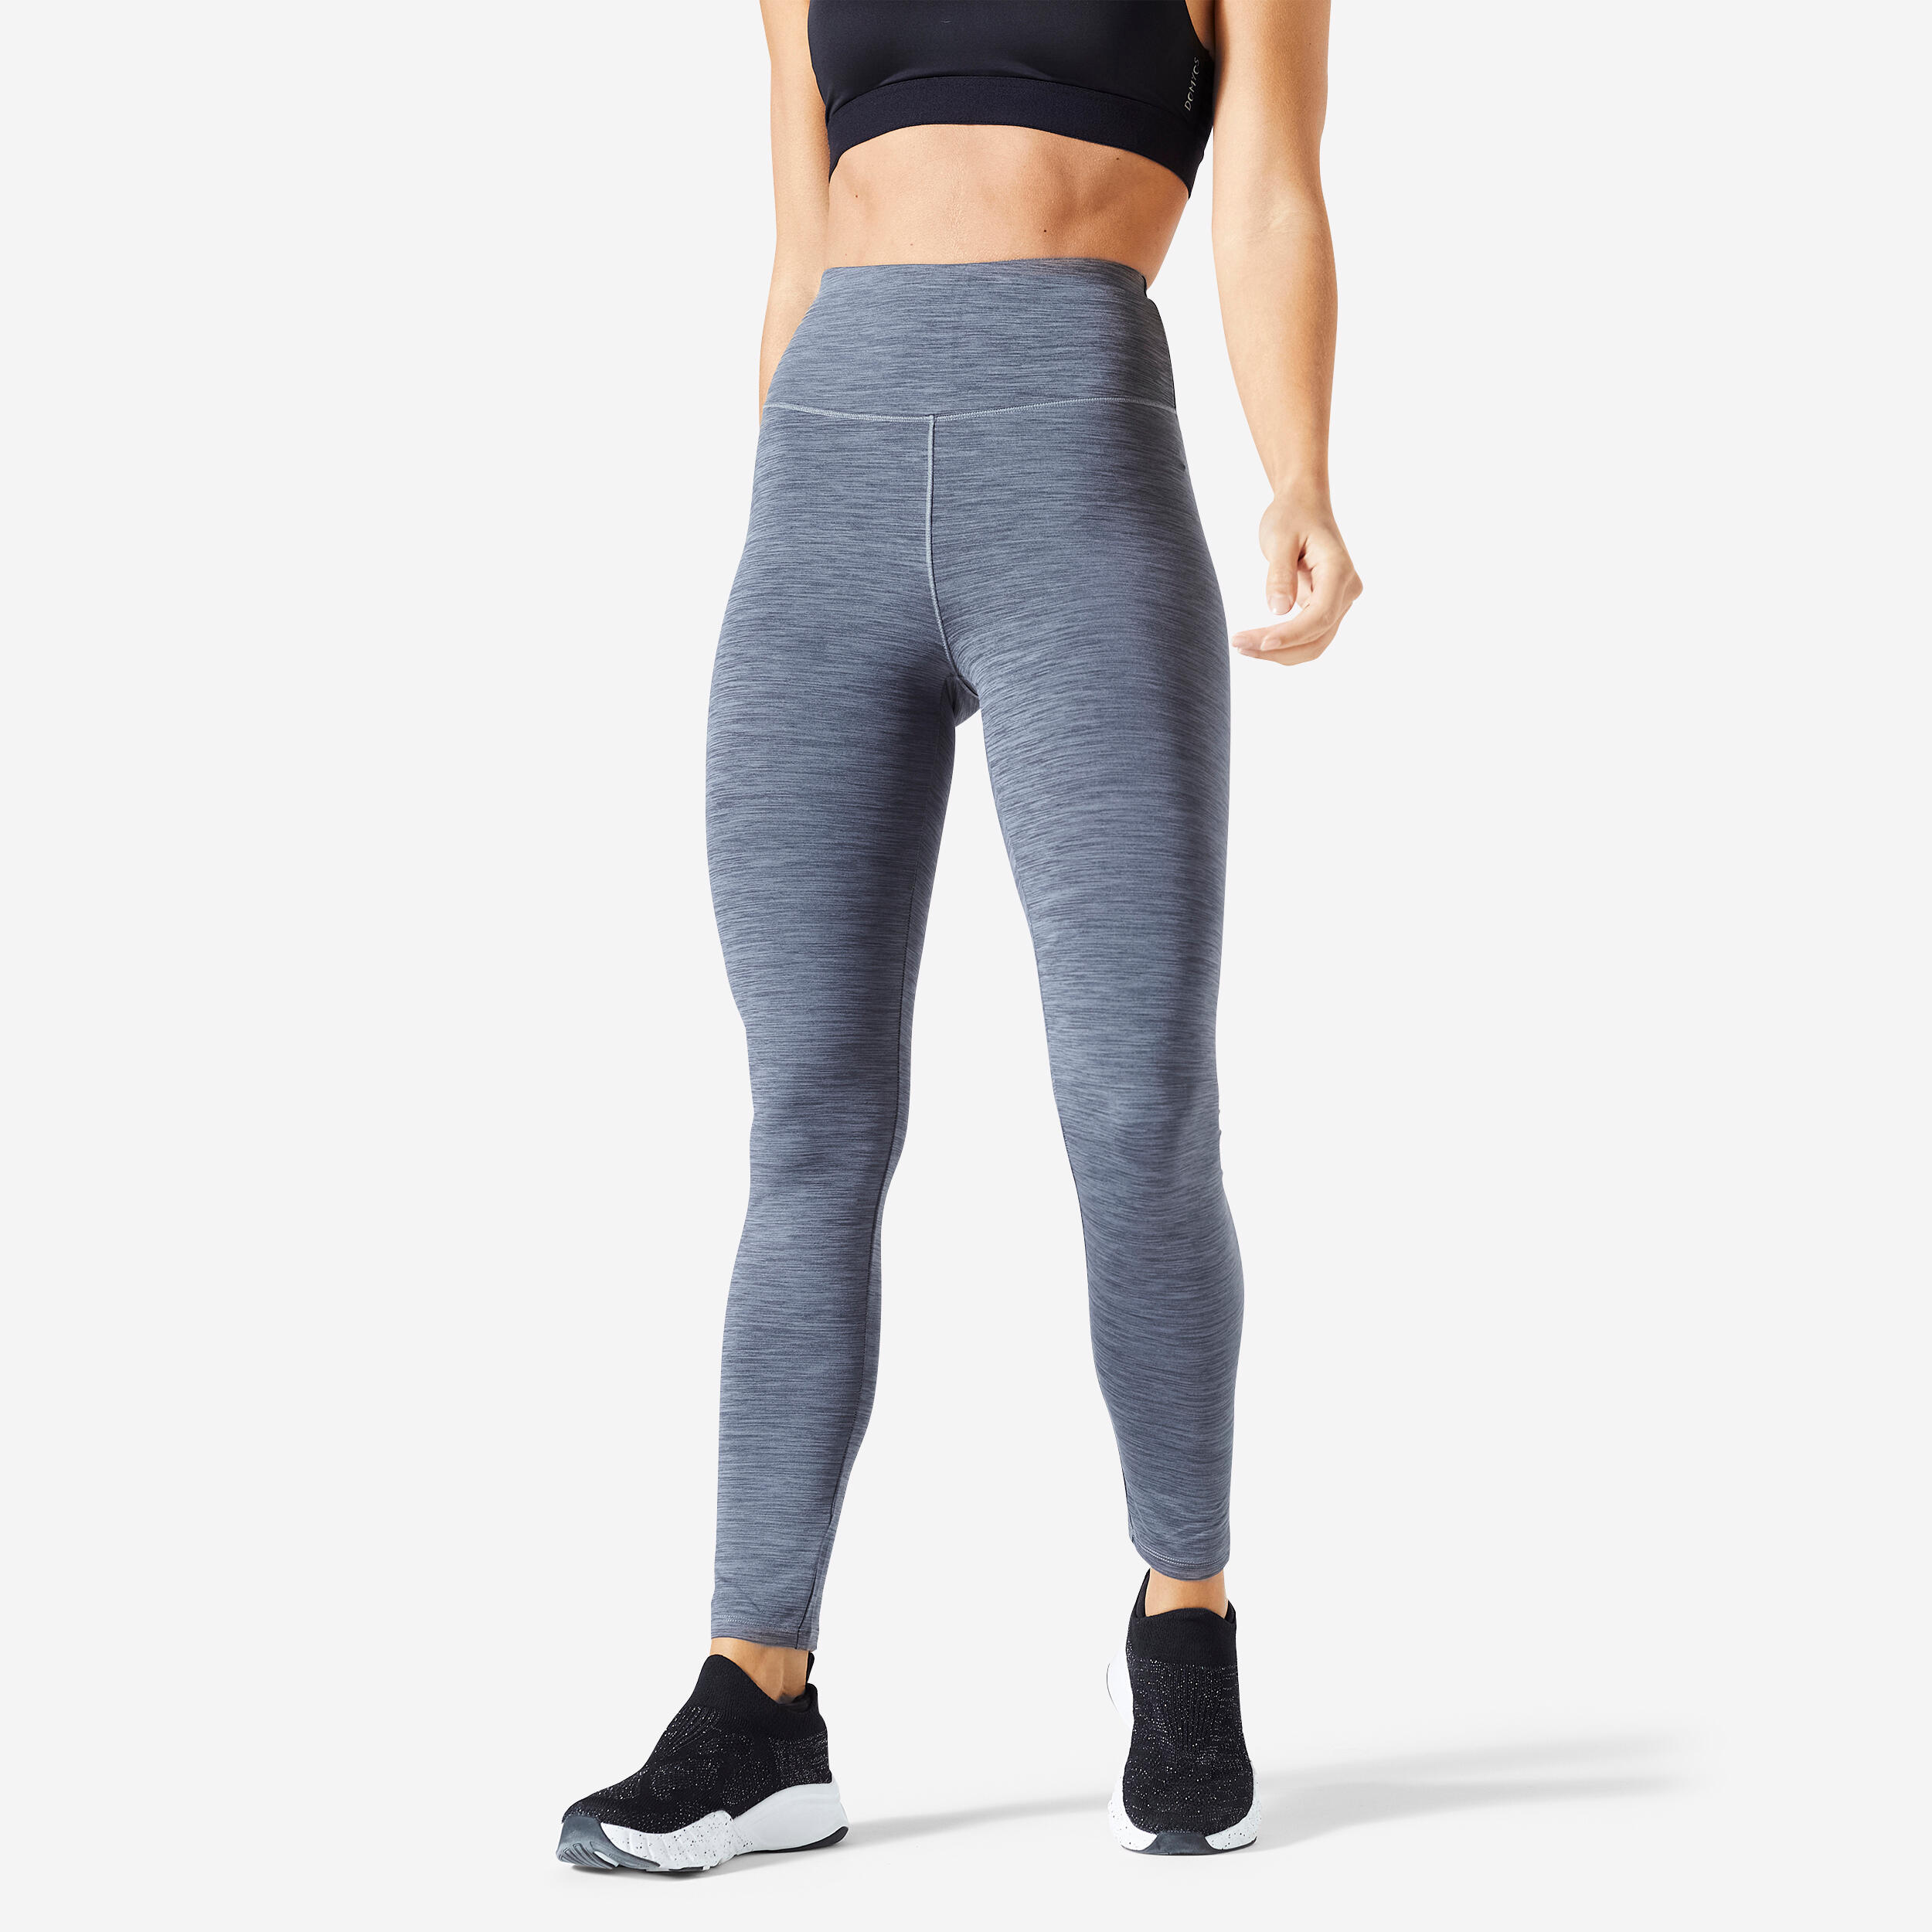 Buy NIKE Women's Dri-Fit Legendary Mid Rise Training Tights-Cool Grey/Sky  Blue-Large at Amazon.in